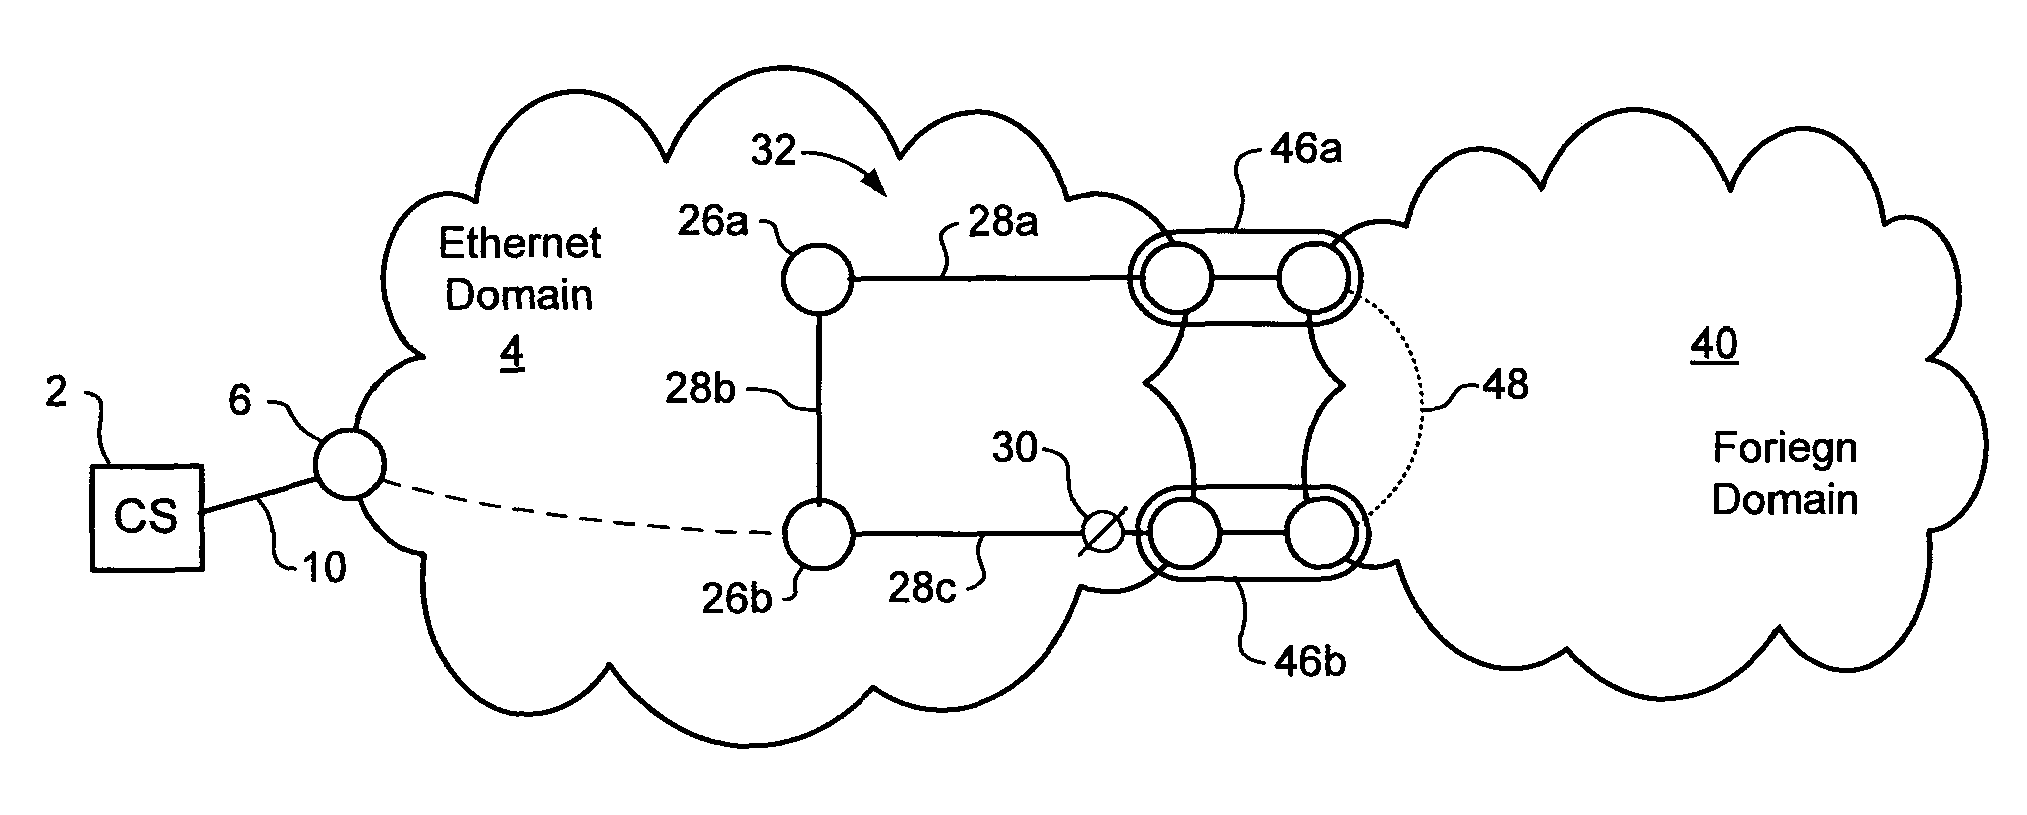 Dual homed E-spring protection for network domain interworking